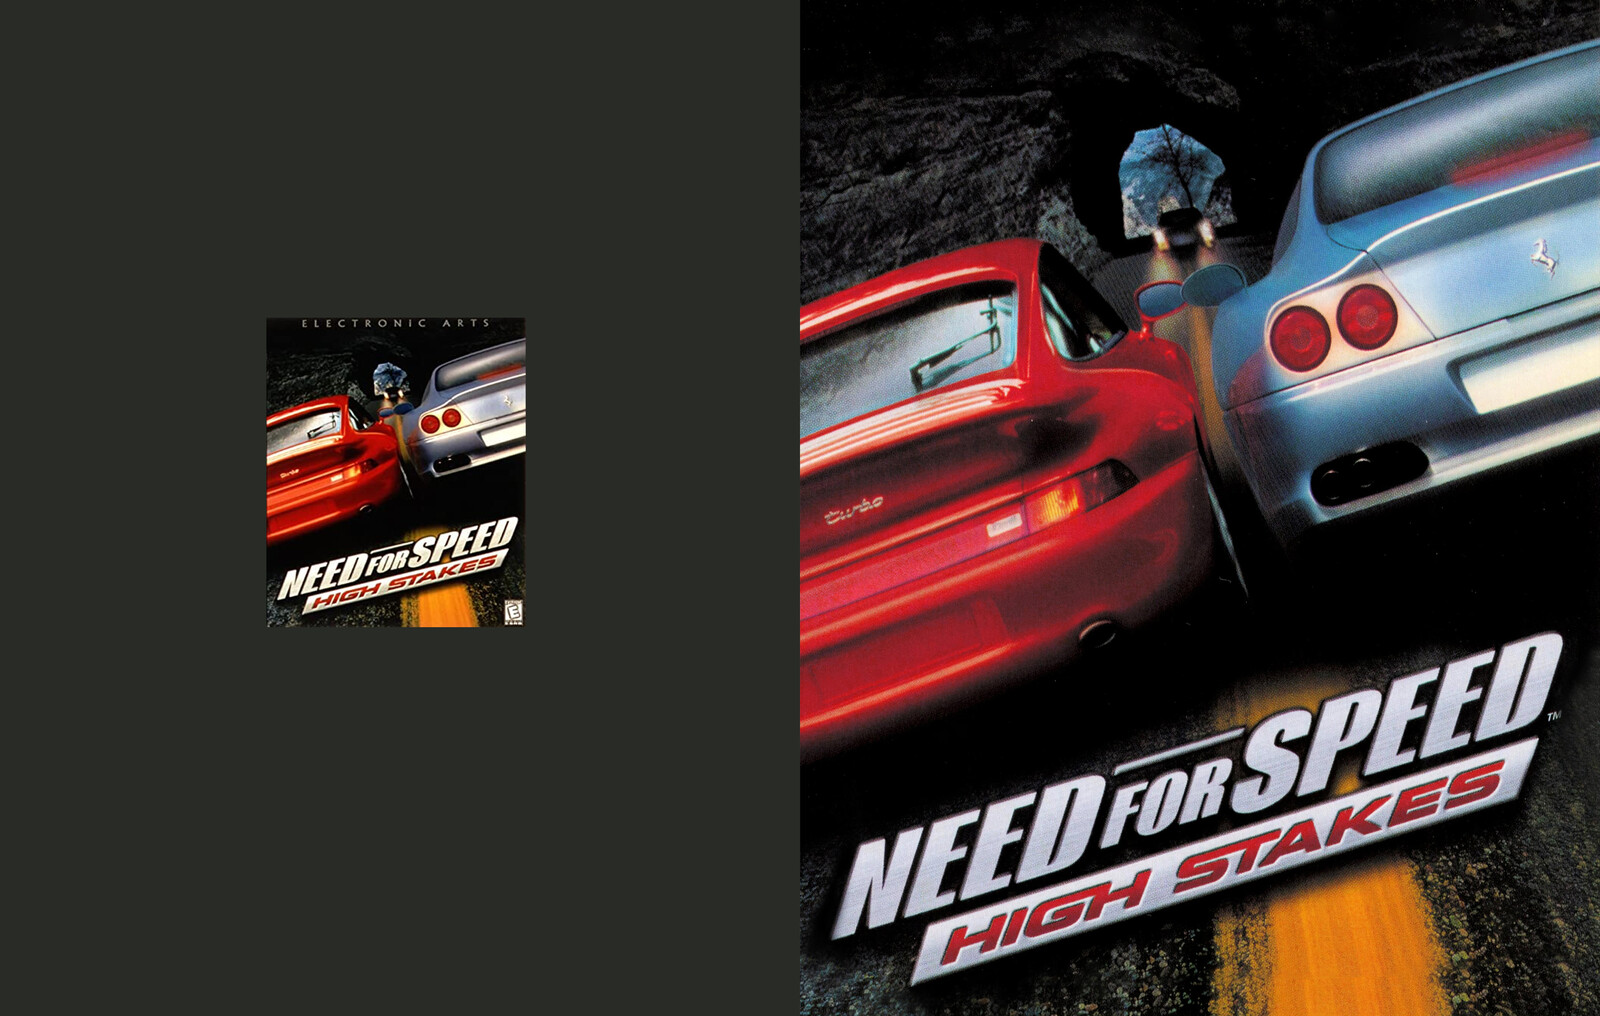 Need for Speed: High Stakes (Original Scan vs. Poster format)